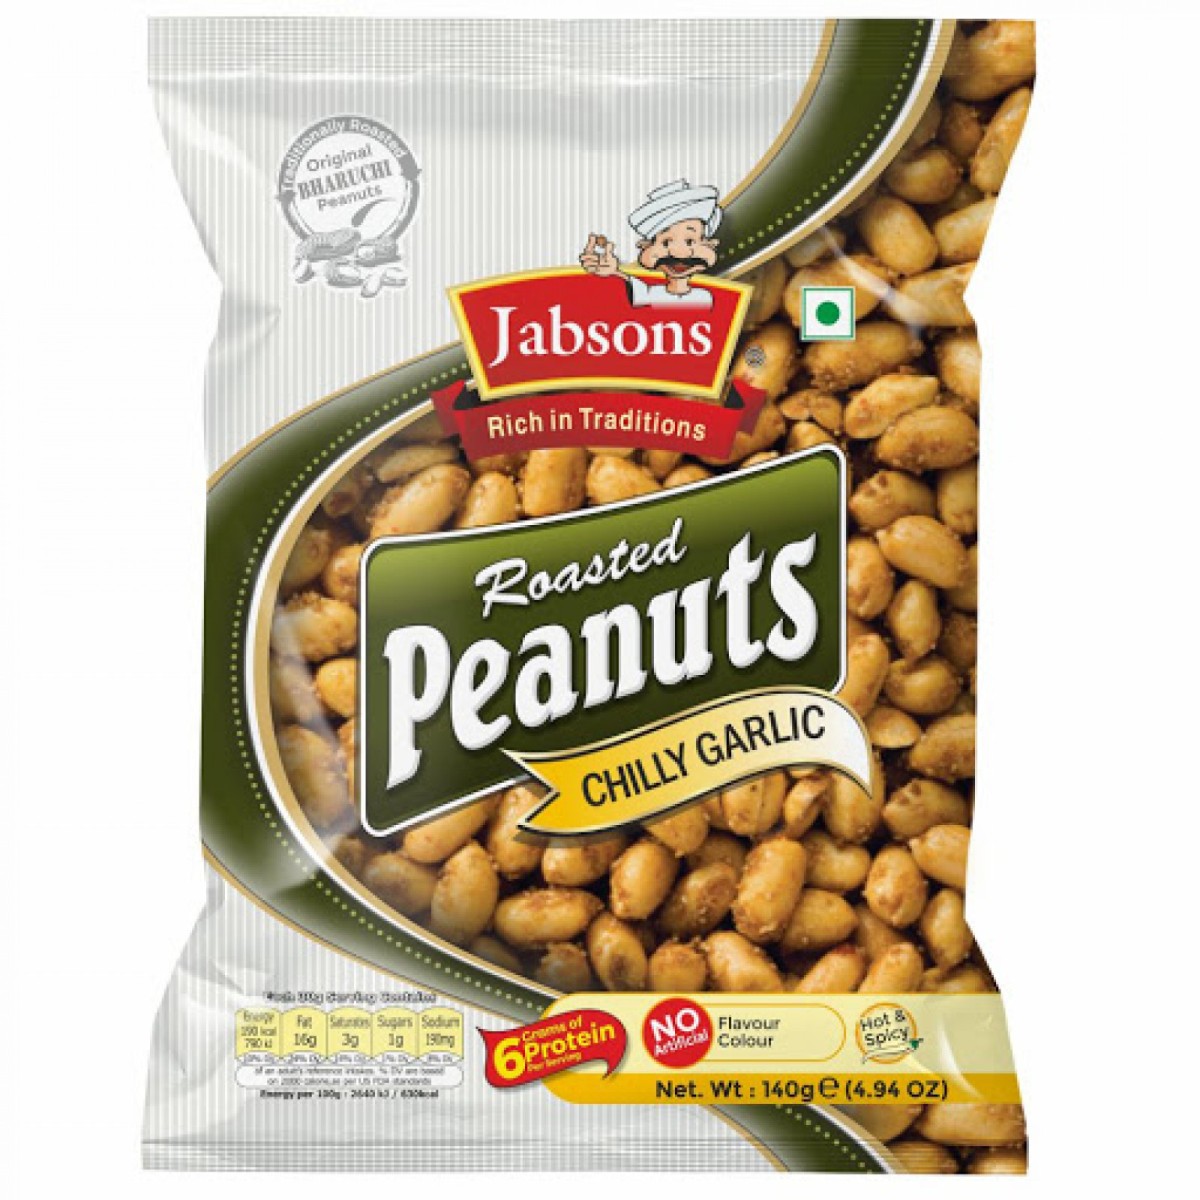 Jabsons Roasted Peanuts - Chilly Garlic 140g